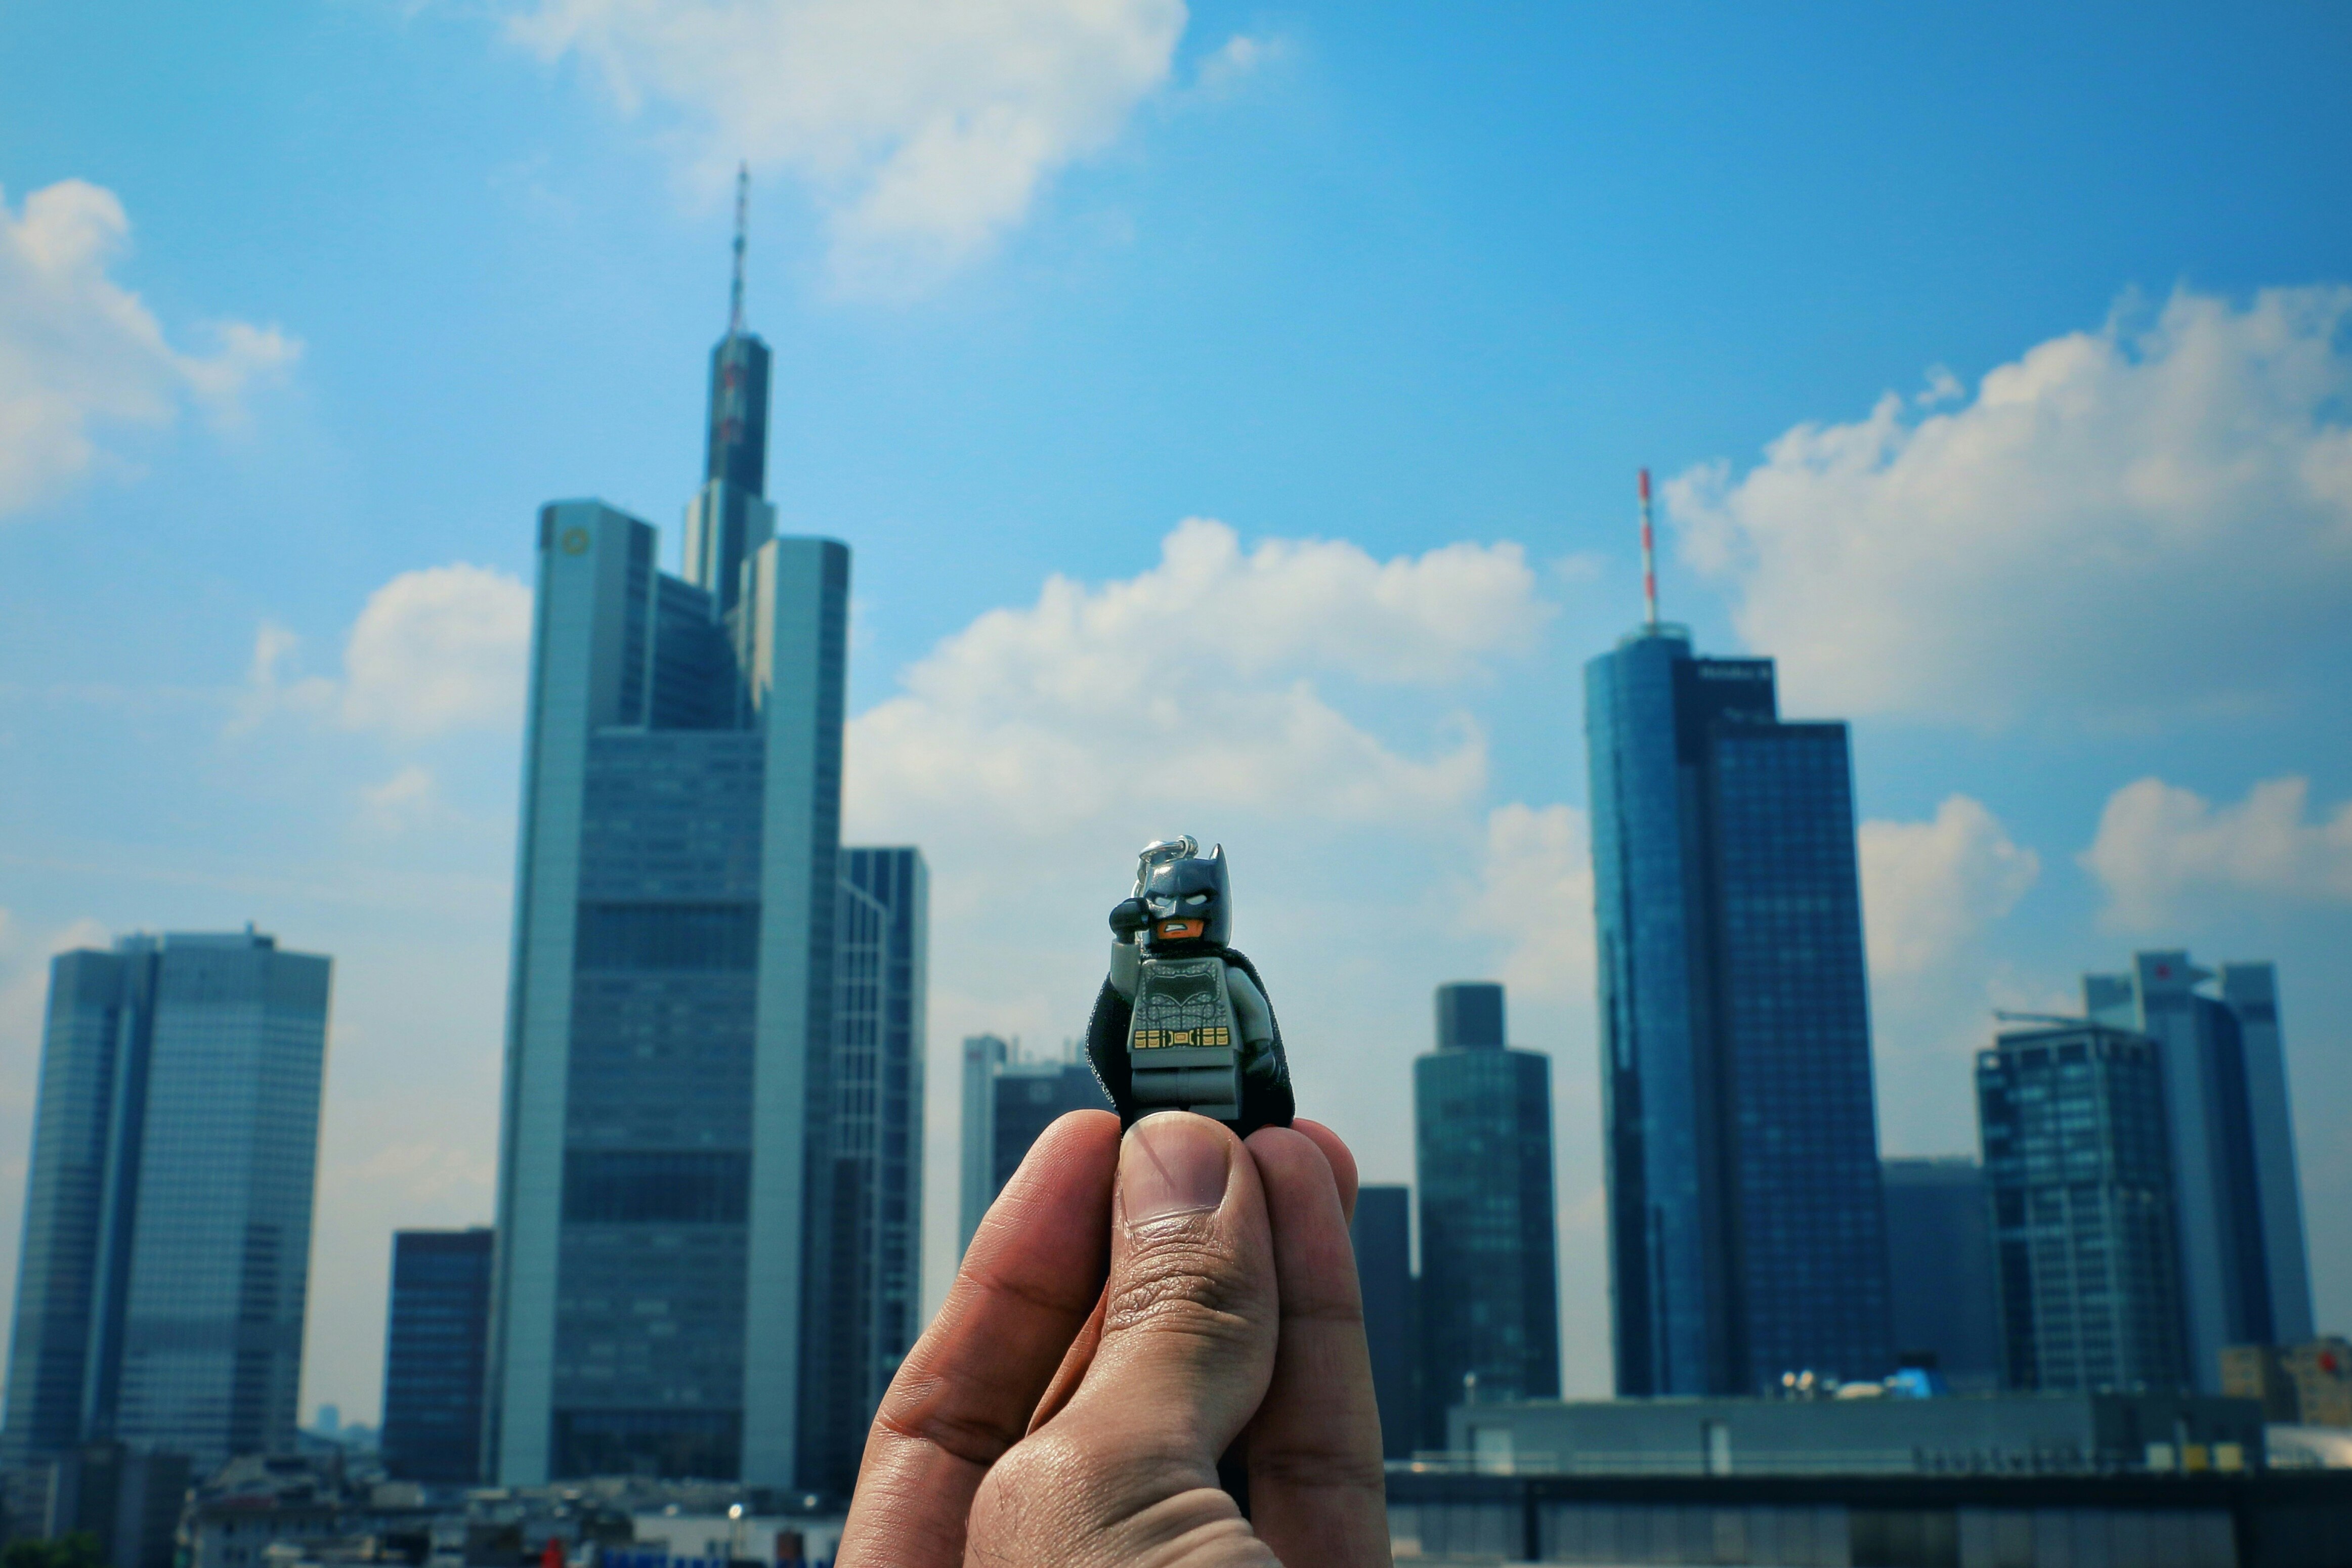 A person holding a Lego guy toy in the air with his fingers, with skyscrapers and a cloudy sky in the background.